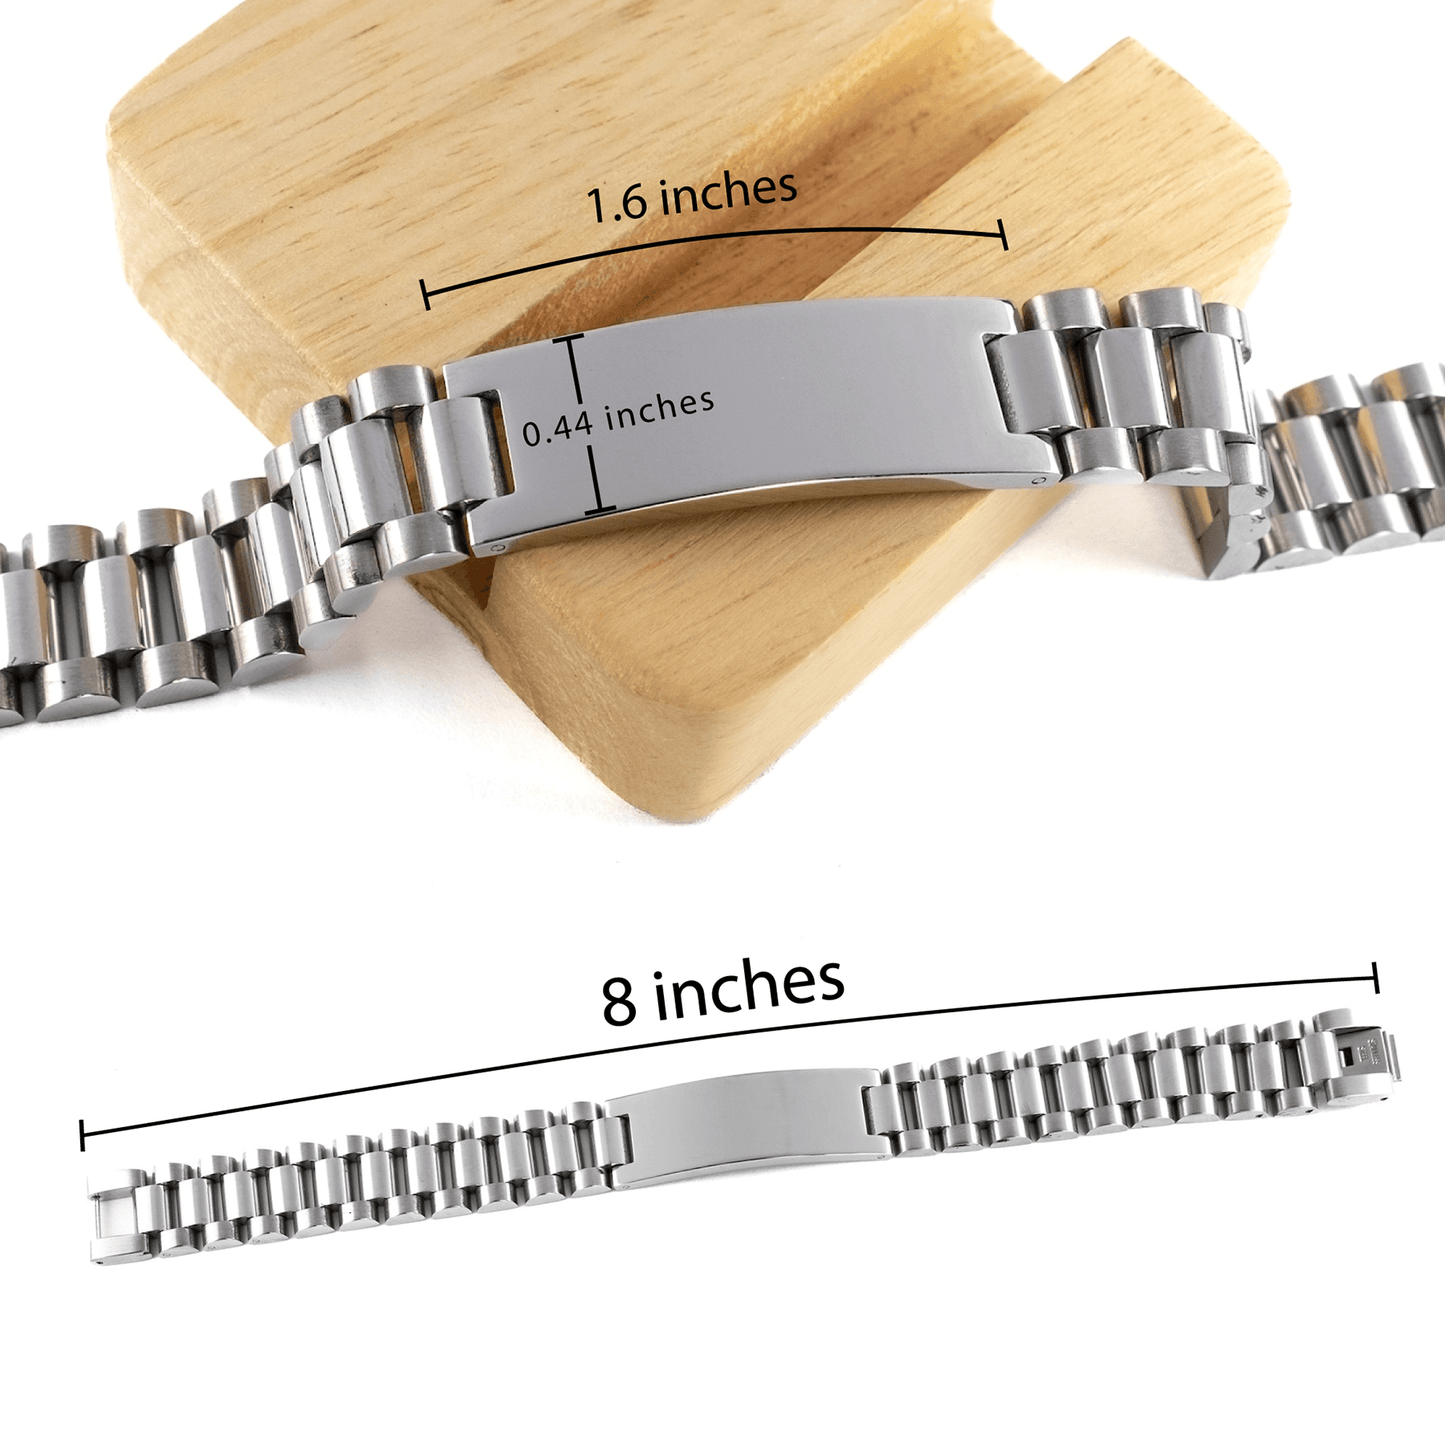 Dancer Ladder Stainless Steel Engraved Bracelet - Thanks for being who you are - Birthday Christmas Jewelry Gifts Coworkers Colleague Boss - Mallard Moon Gift Shop